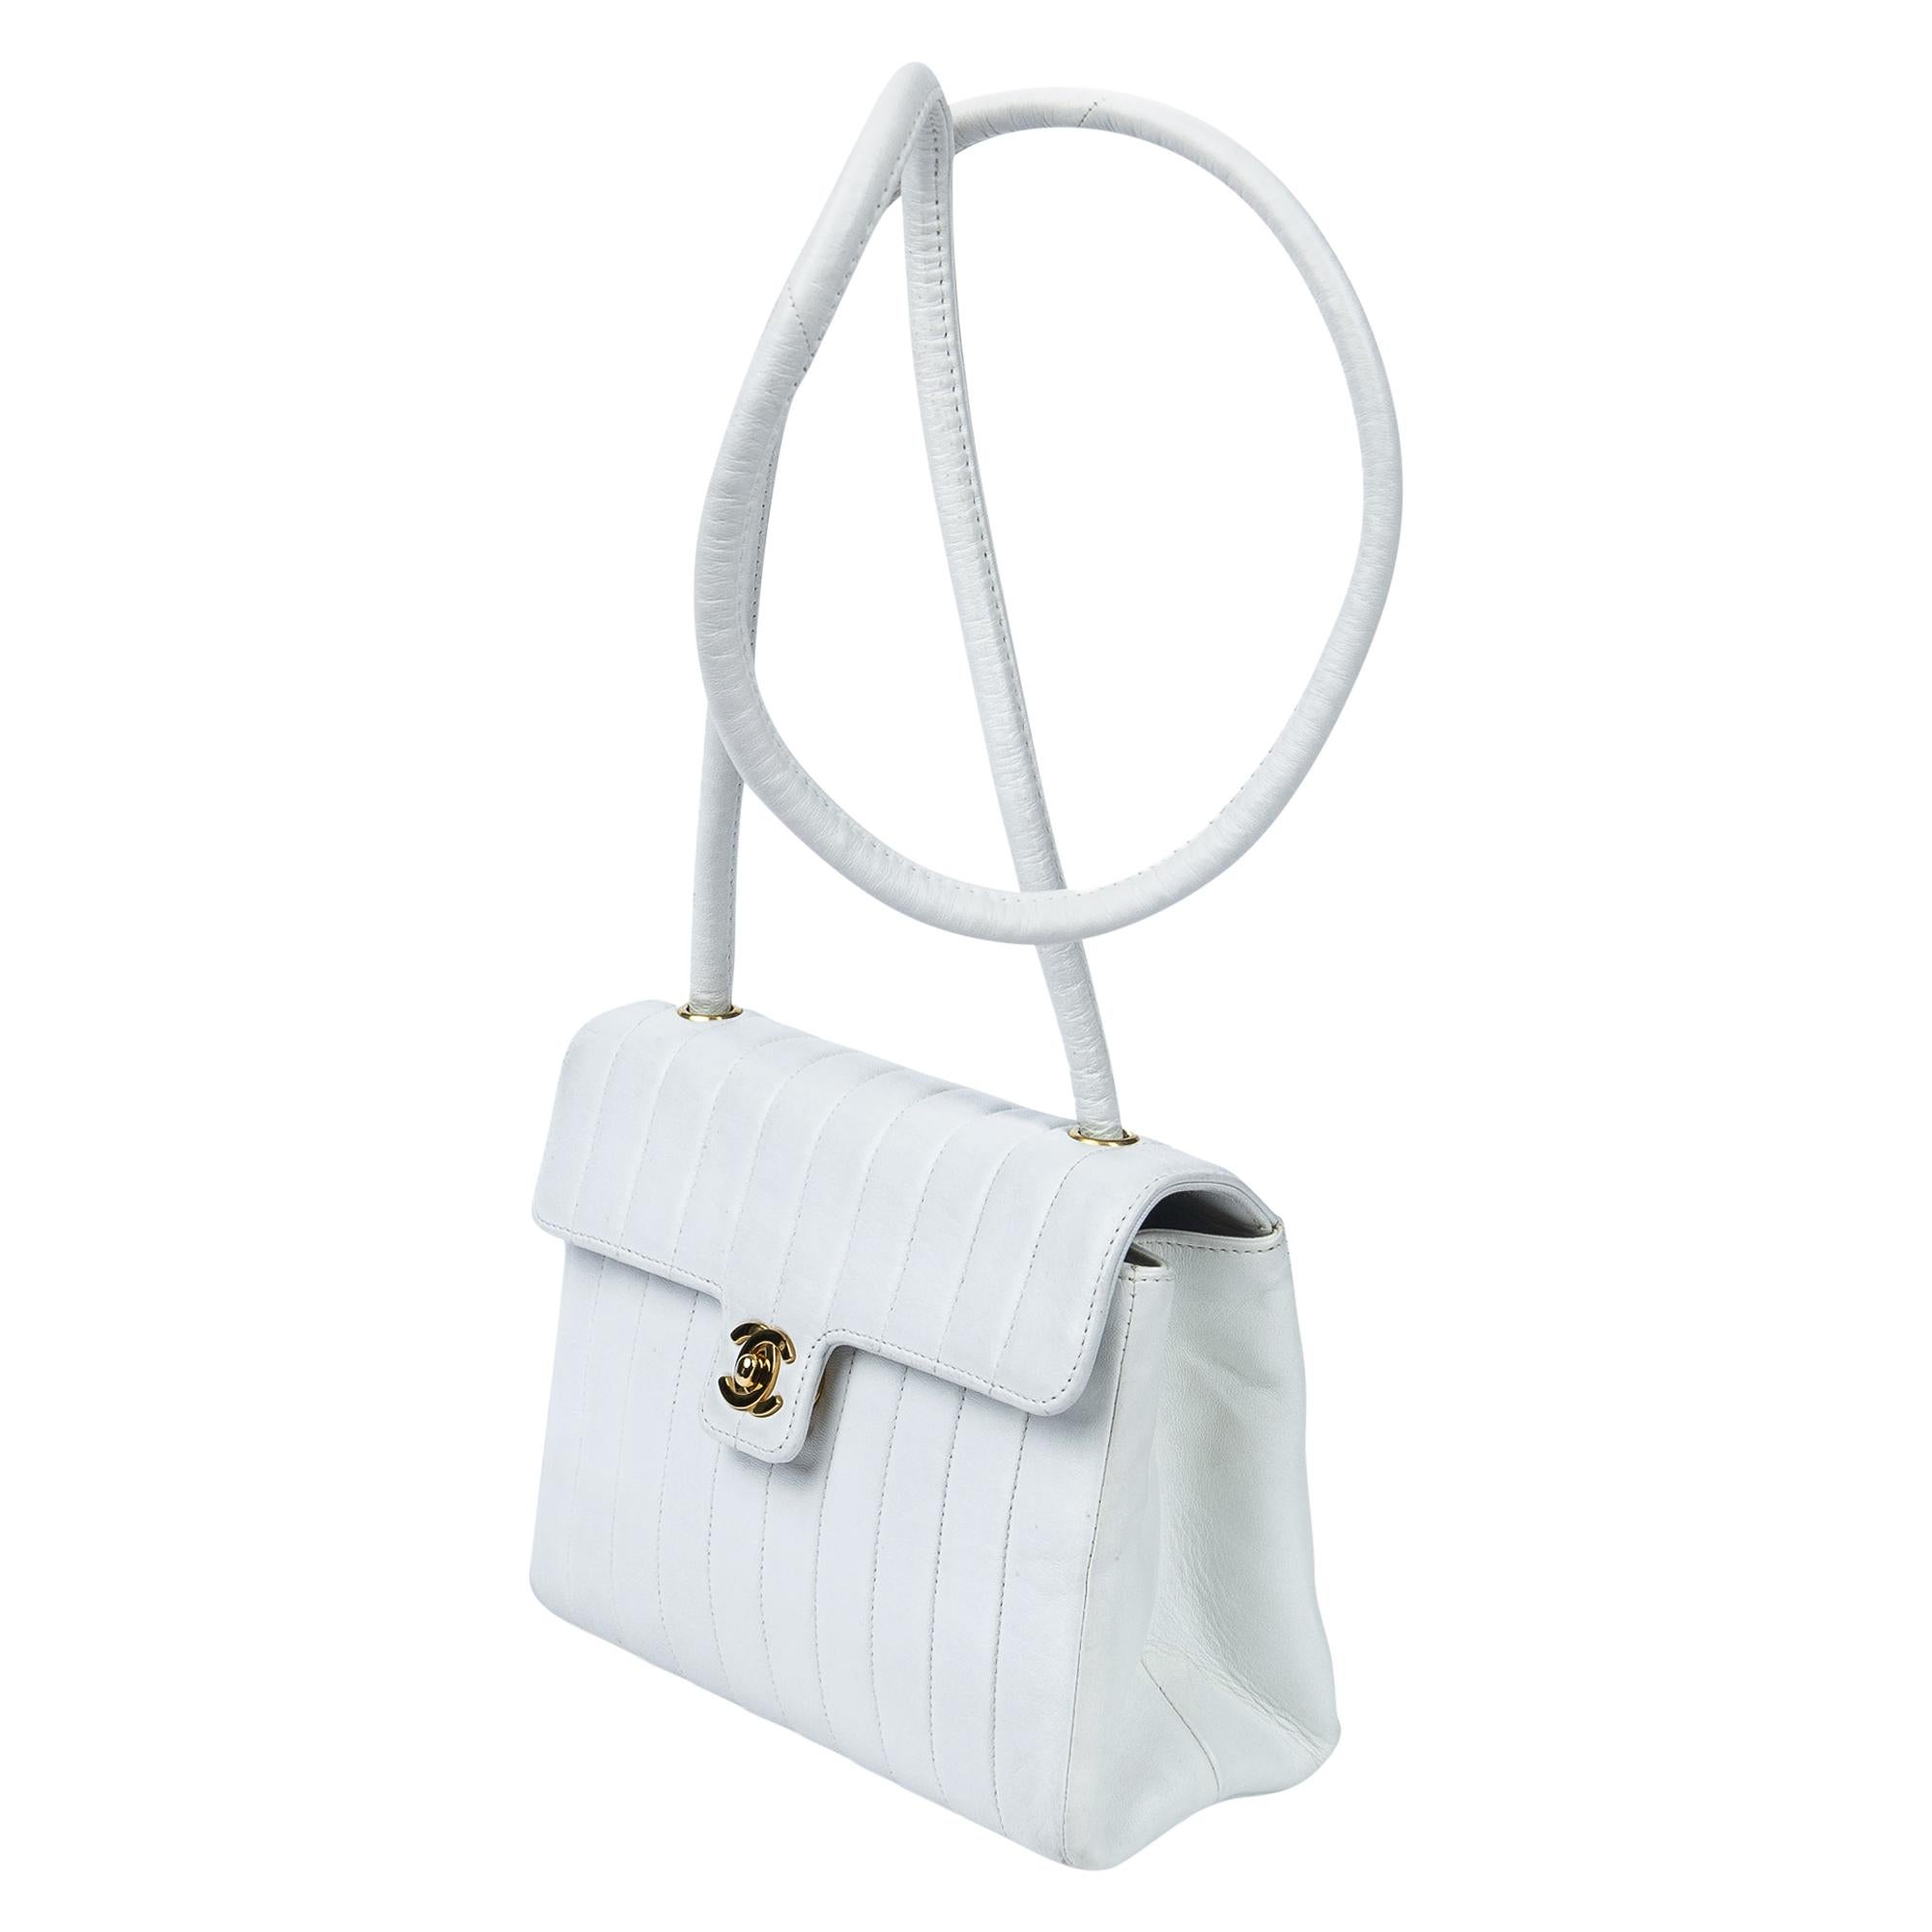 Indulge in timeless elegance with the Chanel 1991 White Striated CC Turnlock Flap Bag. Crafted from luxurious lambskin leather in pristine white, it epitomizes sophistication. Adorned with a signature CC turnlock closure in gold, its leather-lined